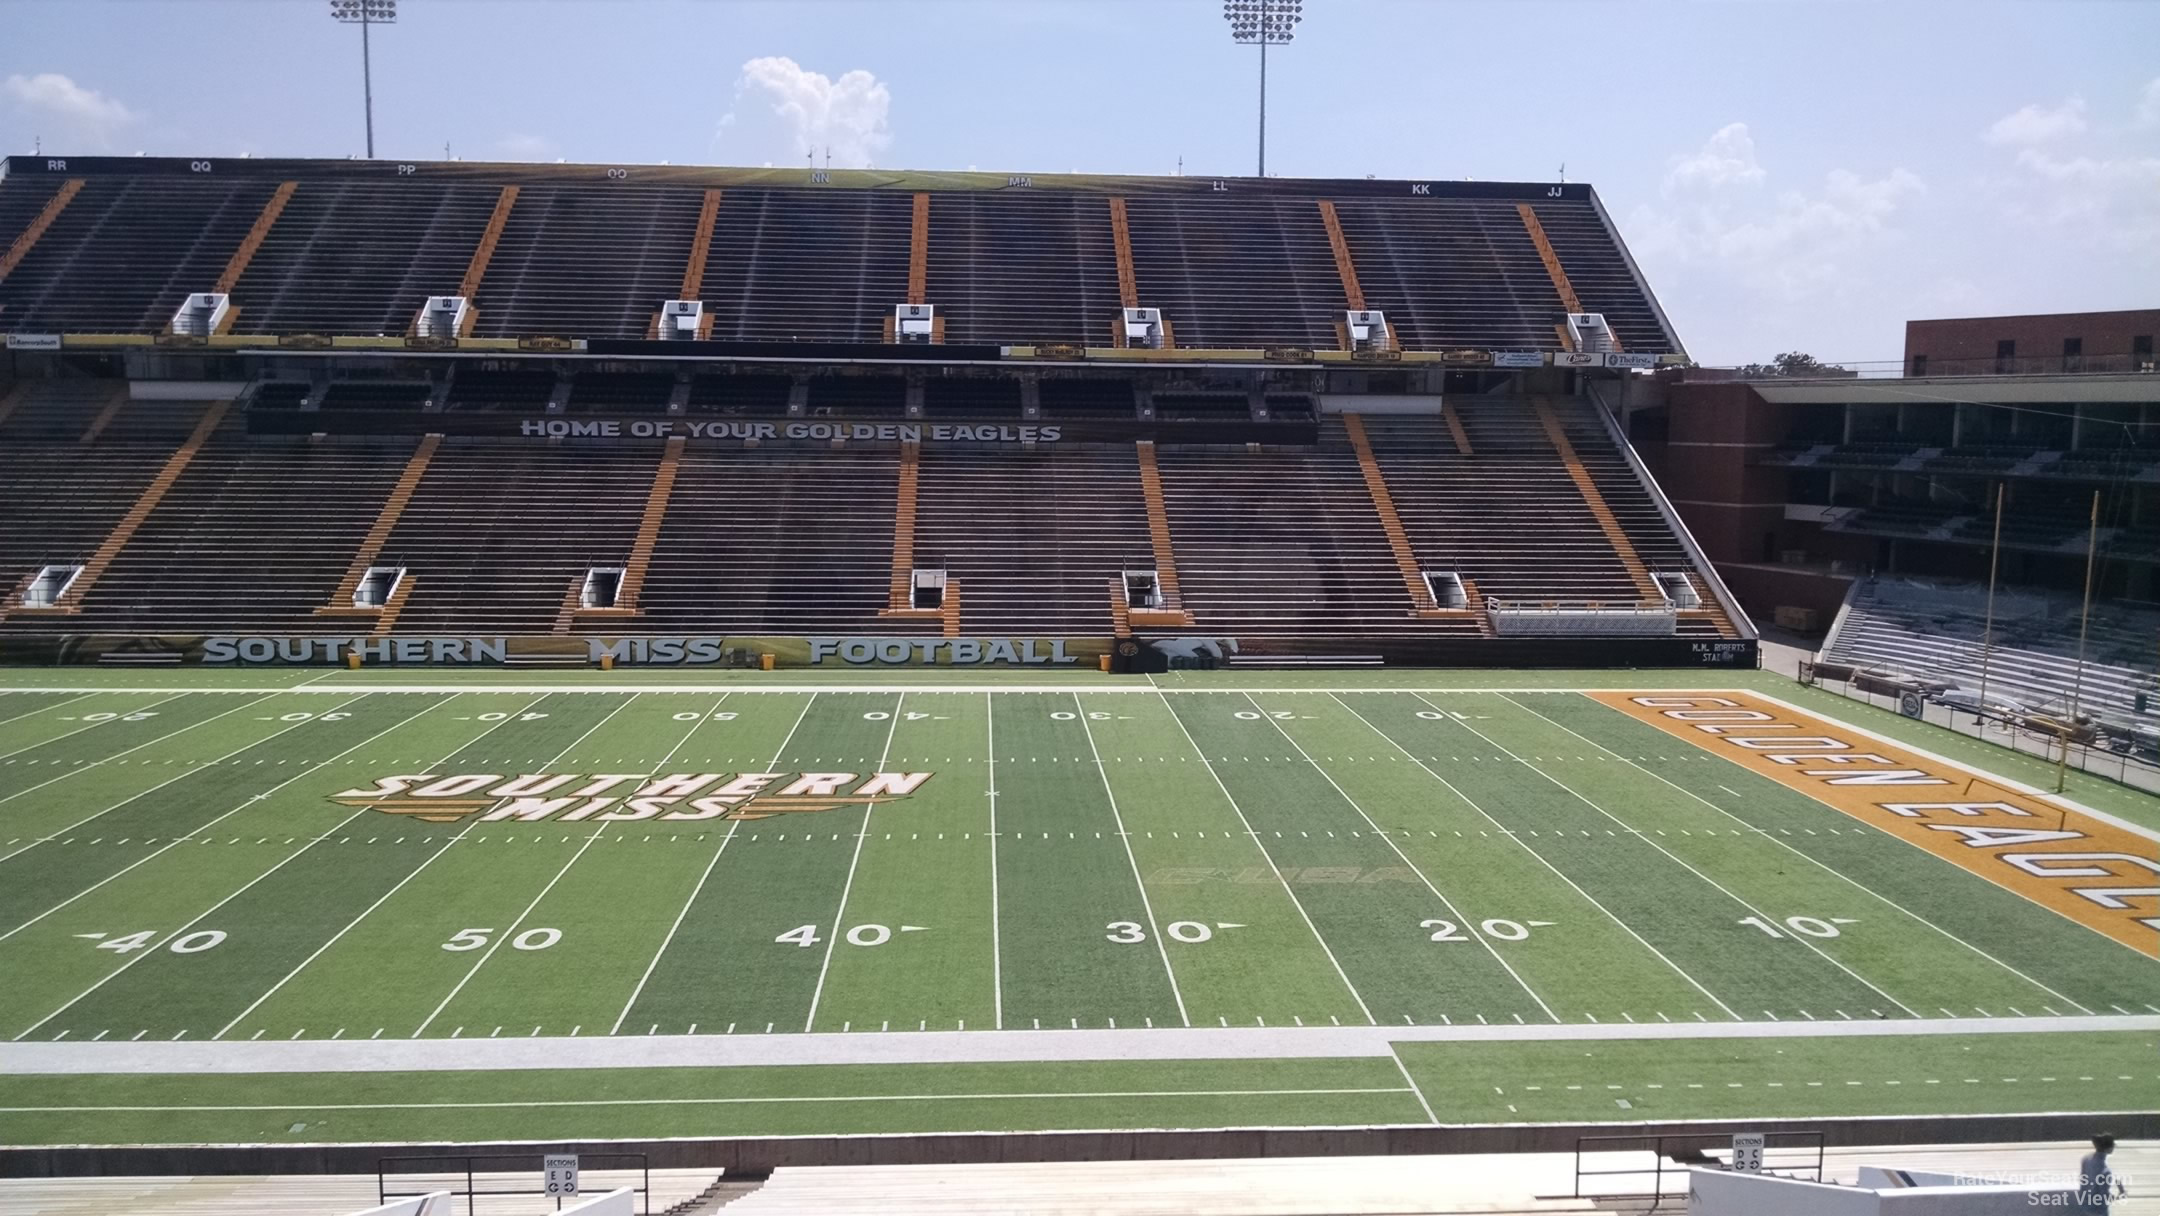 section d, row 42 seat view  - m.m. roberts stadium